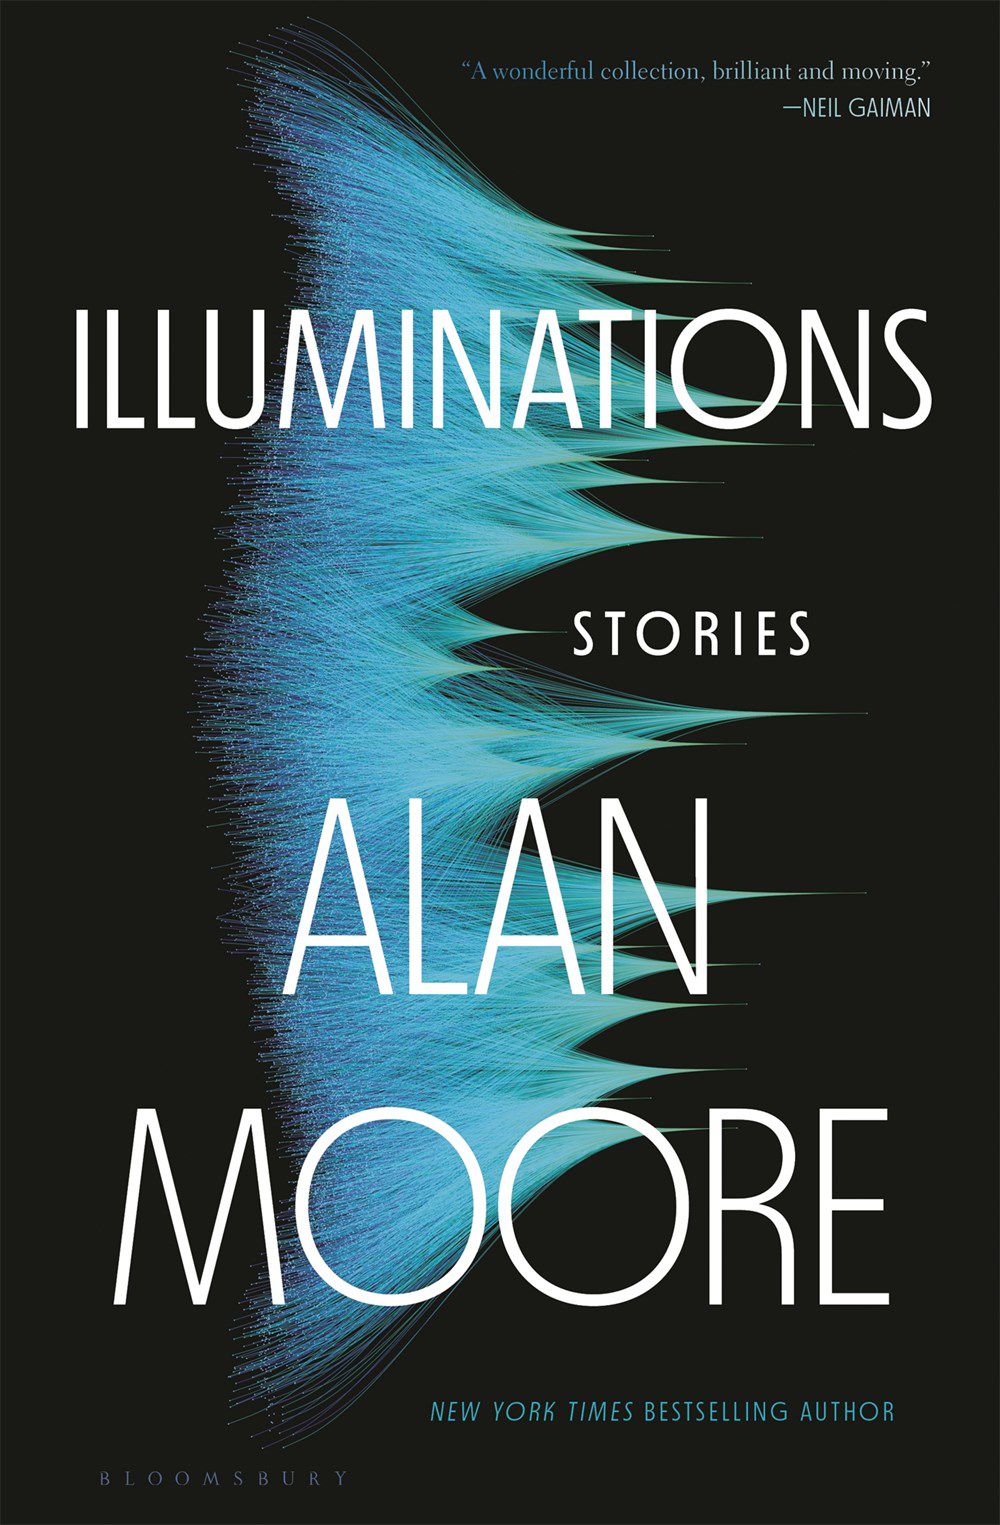 Cover image for Alan Moore’s Illuminations, with an image of what looks like wispy sideways blue mountain peaks